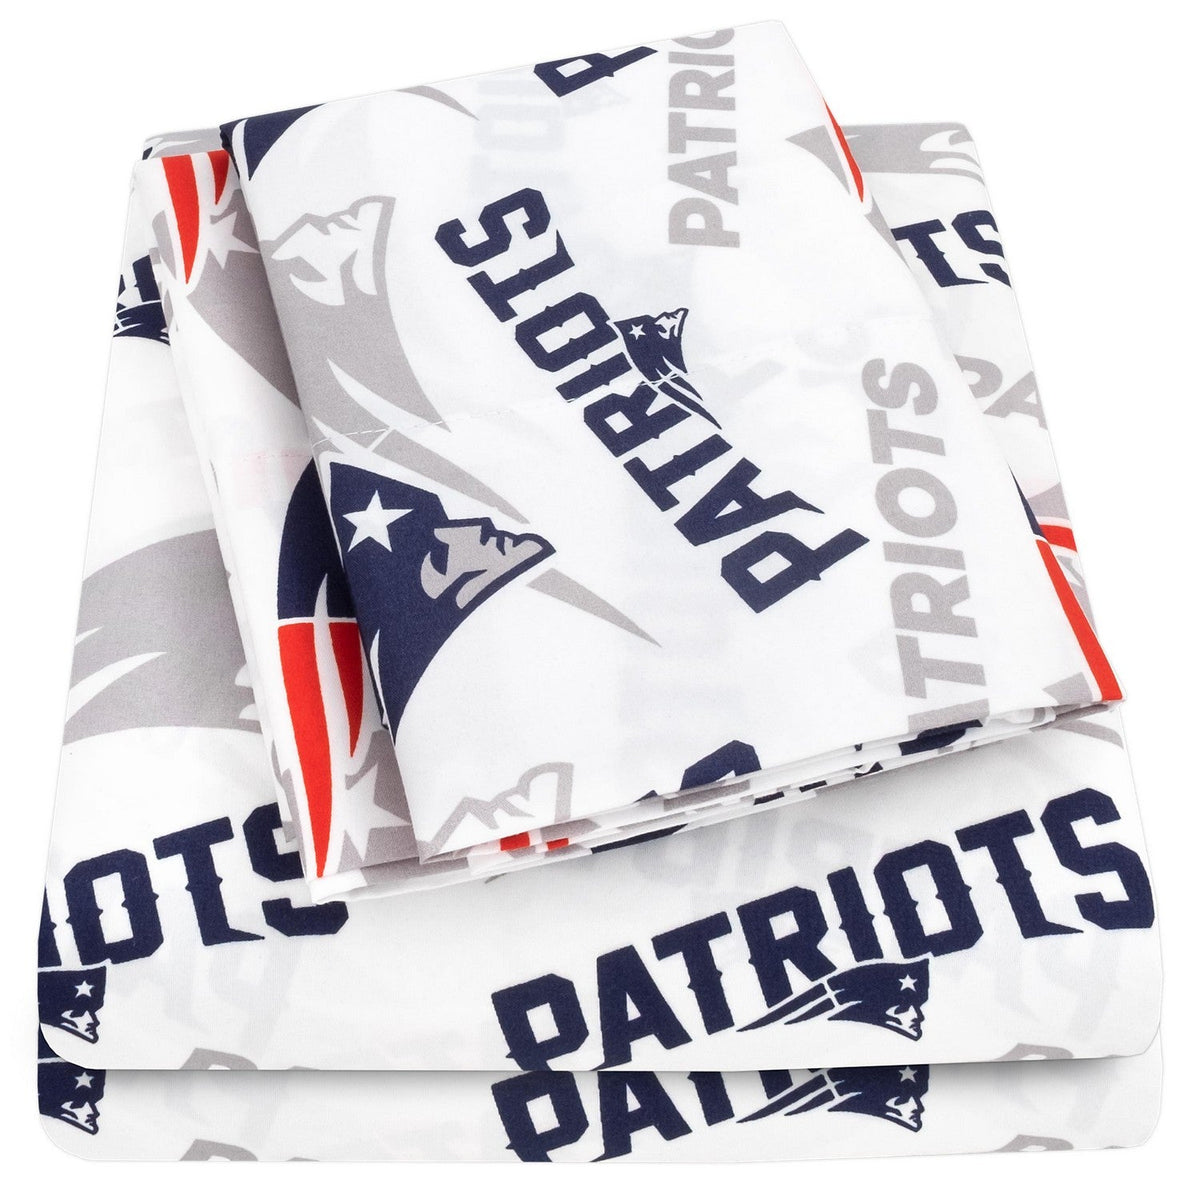 New England Patriots NFL Officially Licensed 4-Piece Sheet Set - Folded